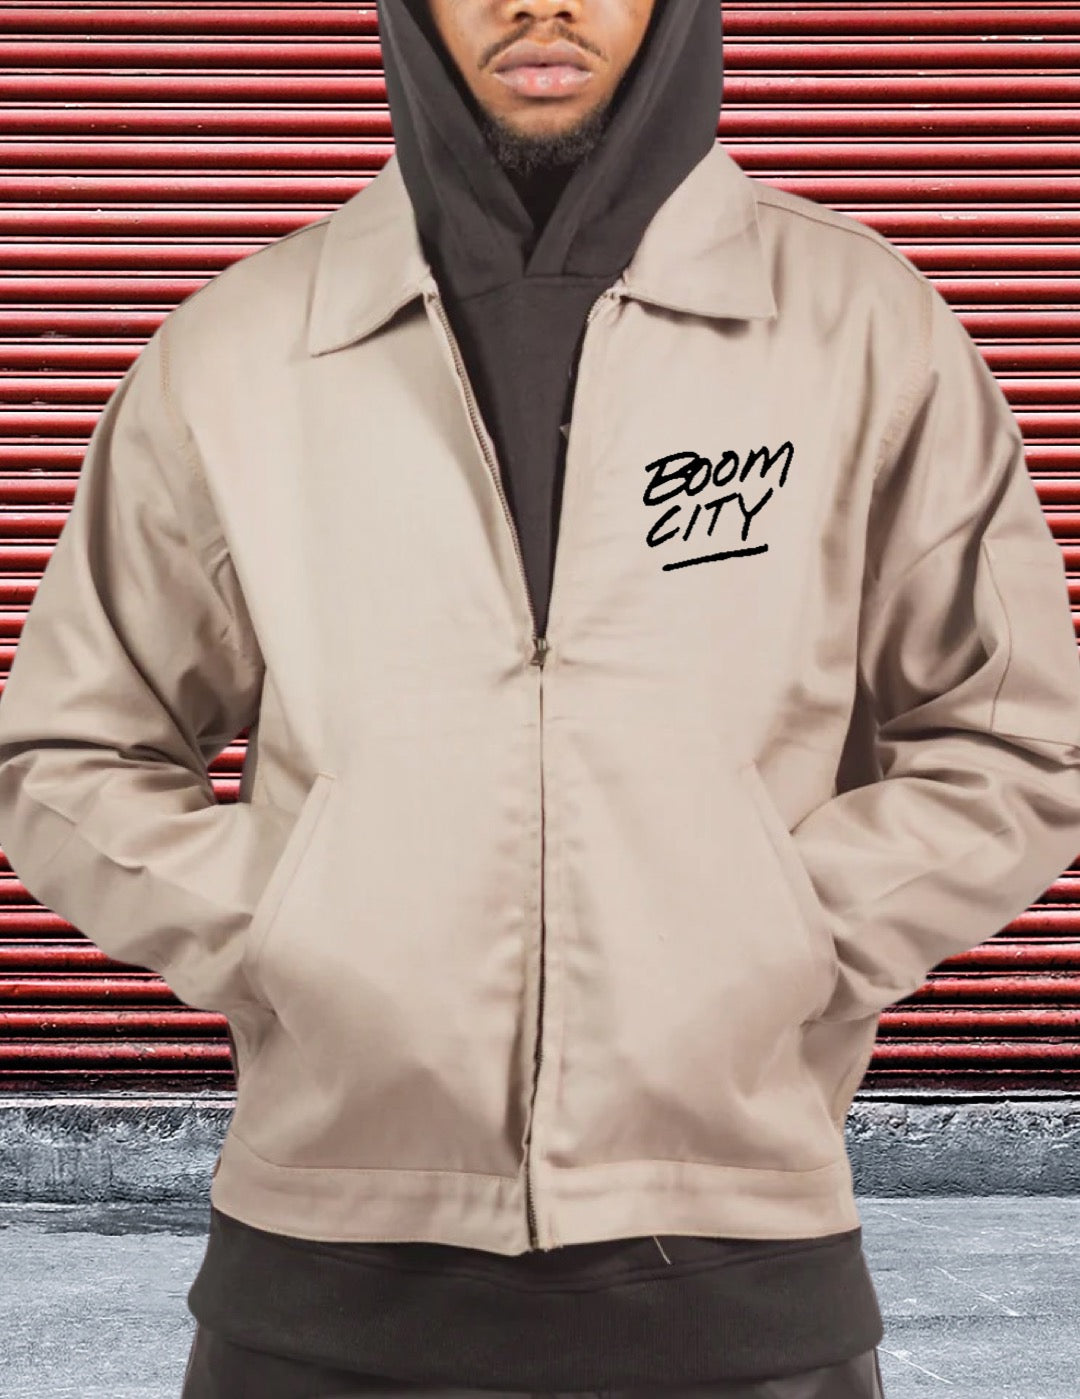 BoomCity Industrial Light weight jackets